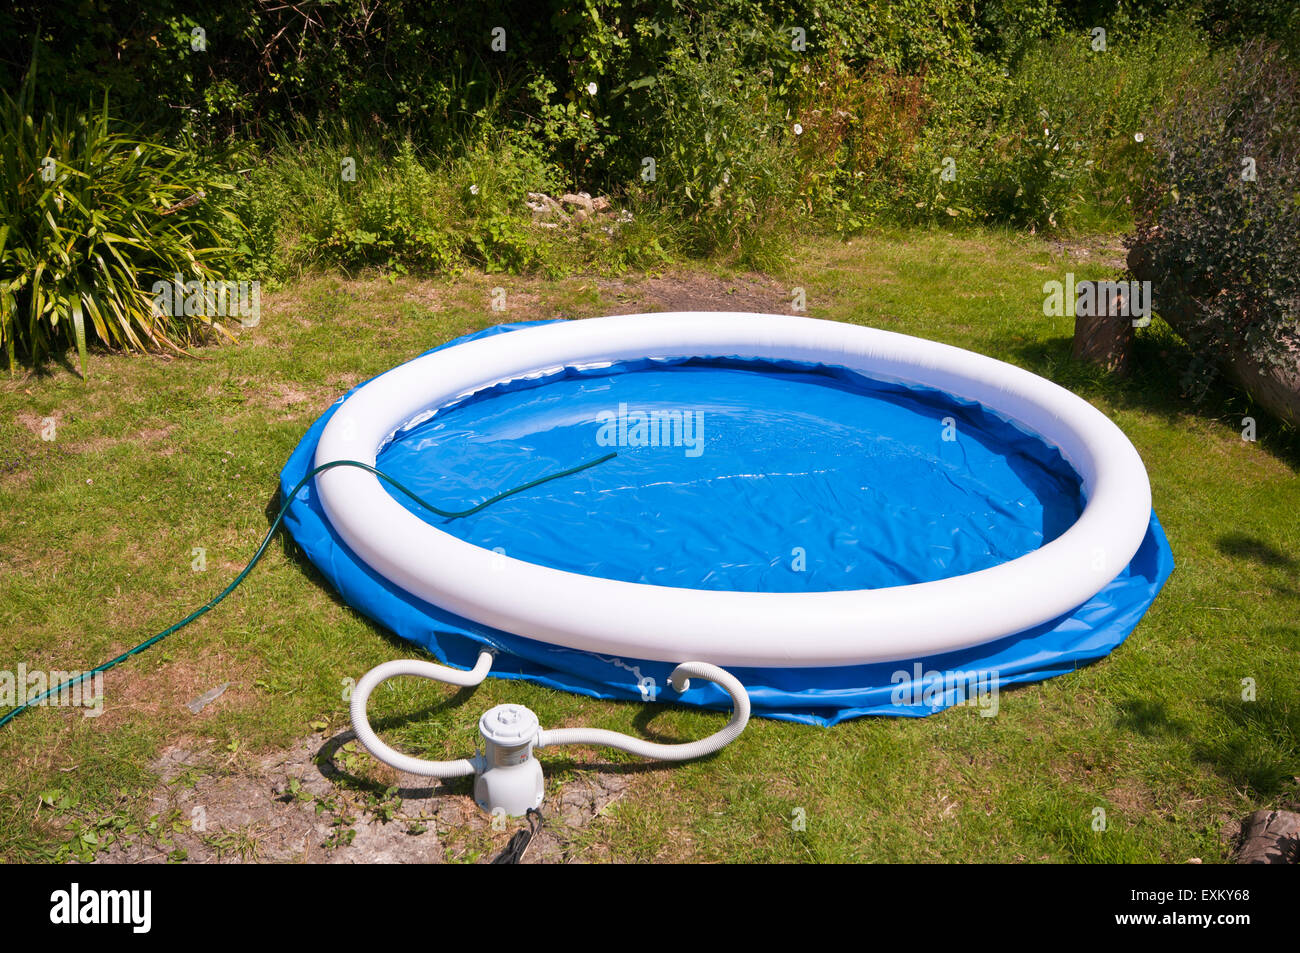 Filling A Paddling Pool With water from a Garden Hosepipe Hose Stock Photo